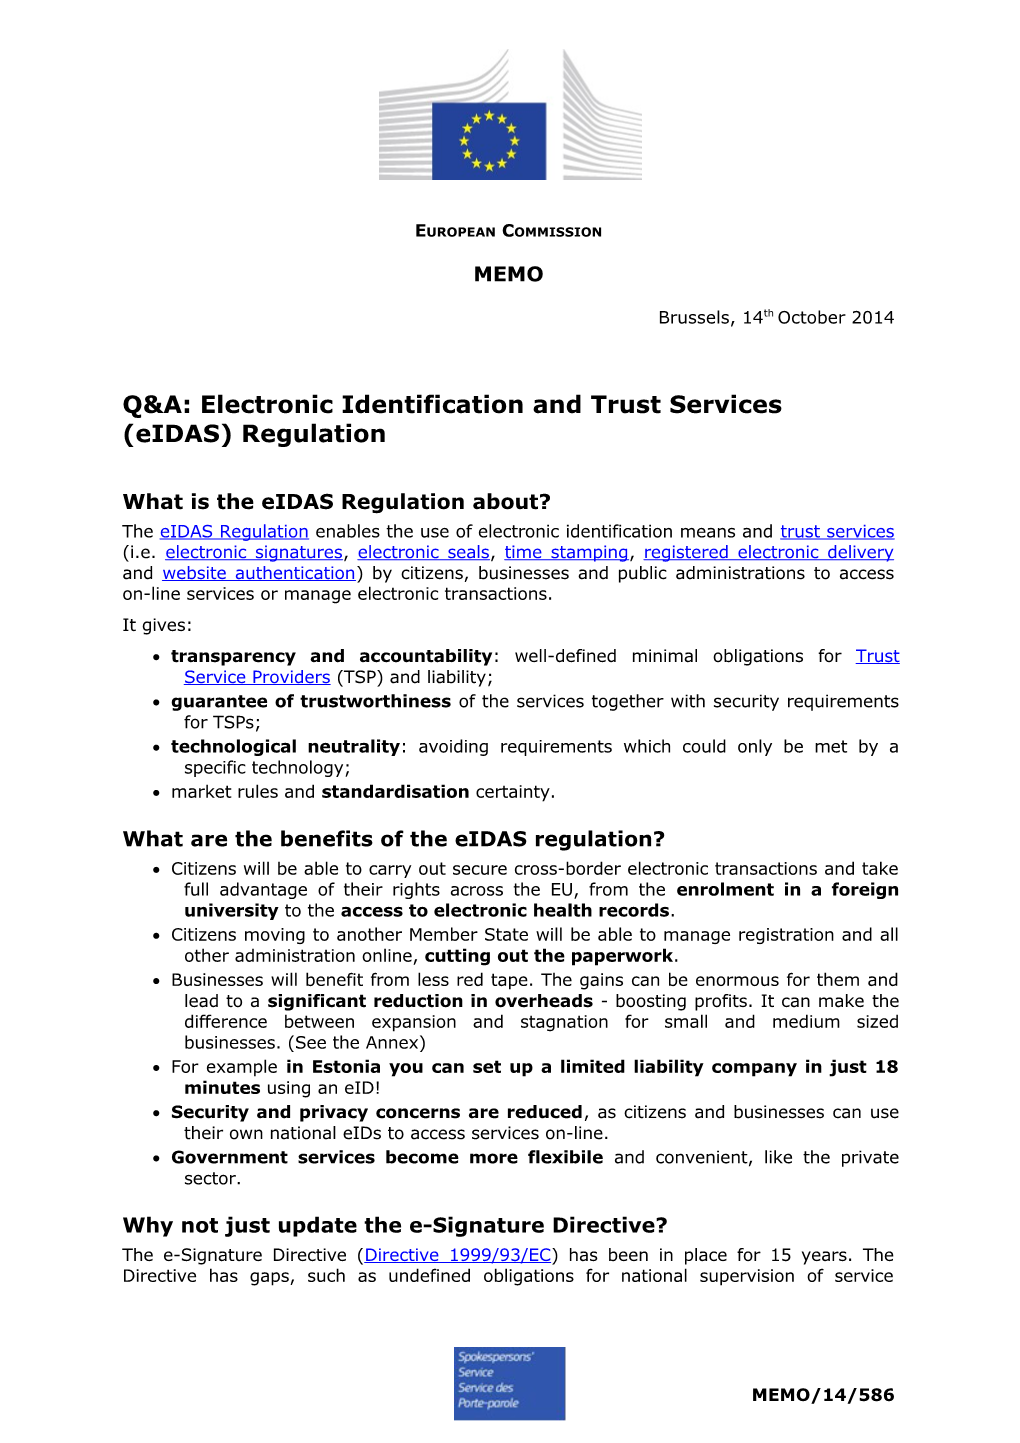 Q&A: Electronic Identification and Trust Services (Eidas) Regulation